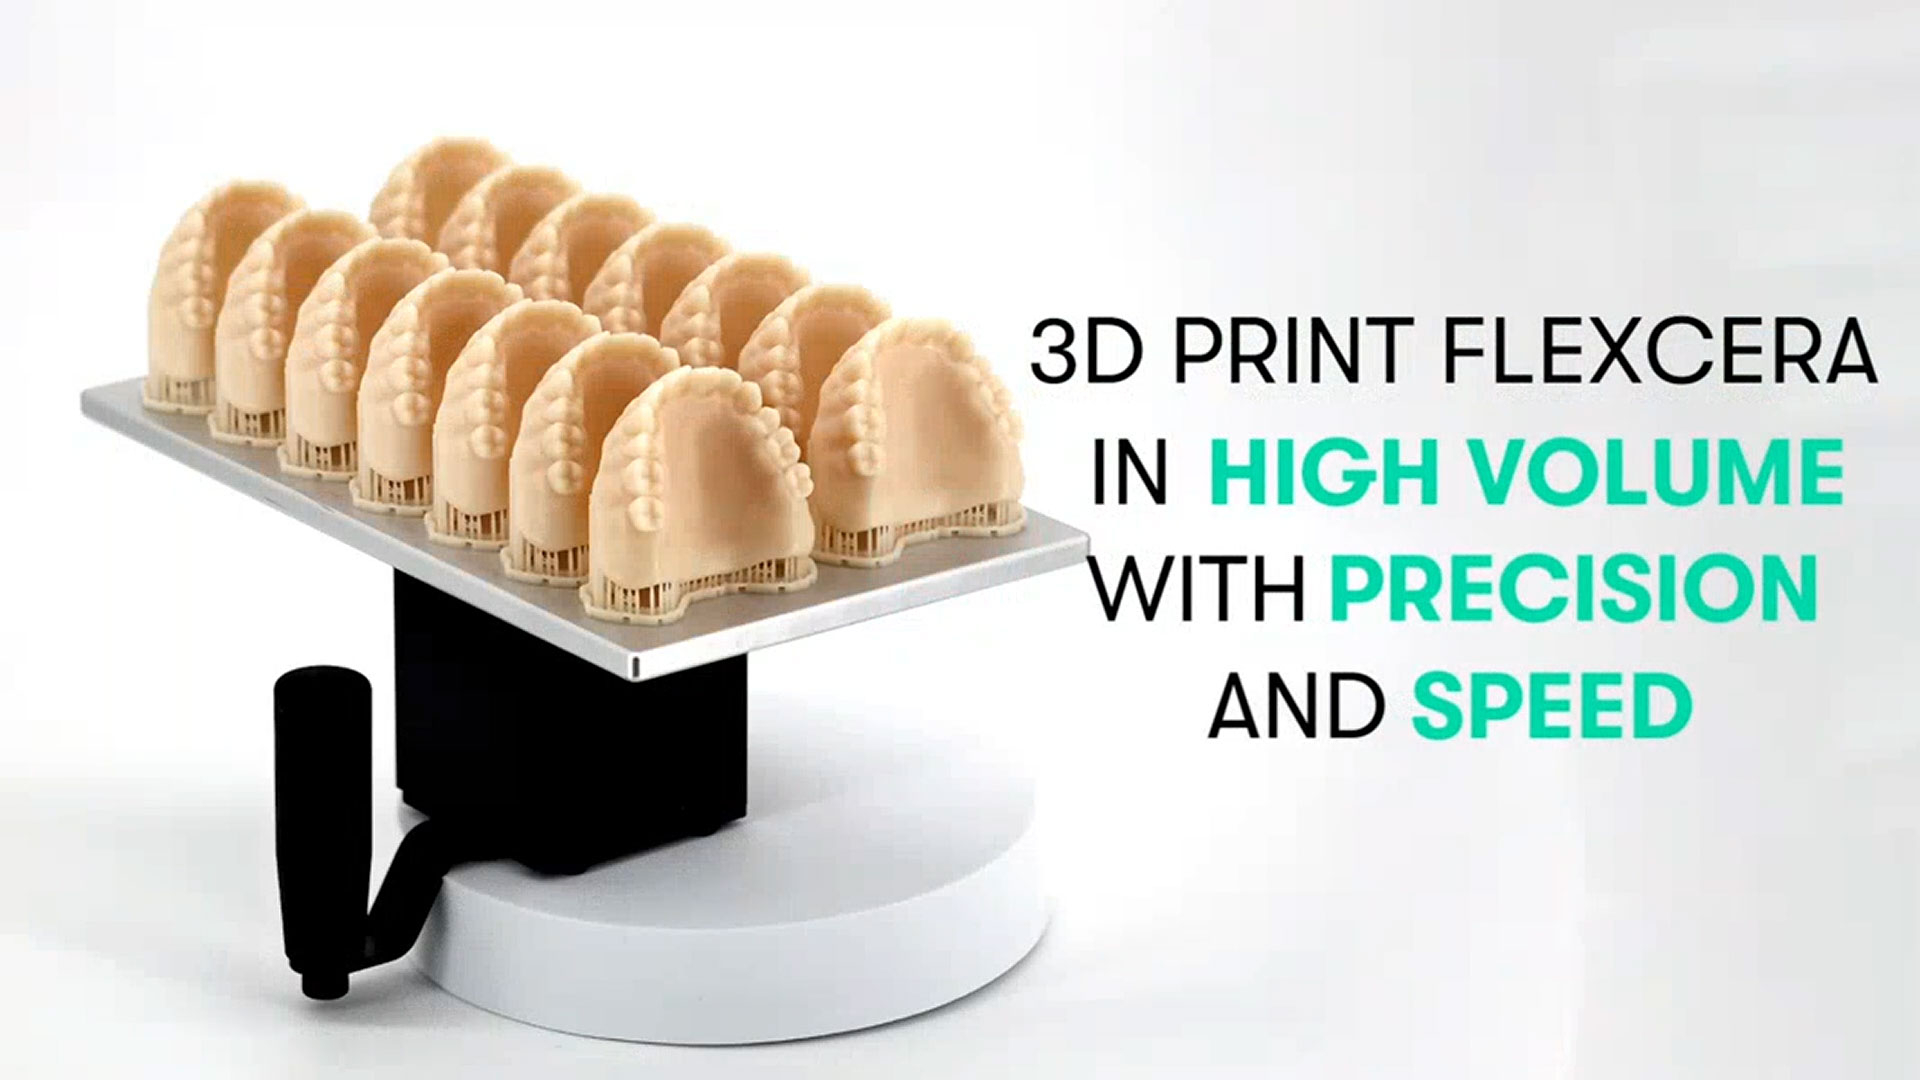 The Desktop Health Einstein Pro XL is now available and qualified to 3D print the popular and proprietary Flexcera™ family of resins for temporary and permanent dental restorations.